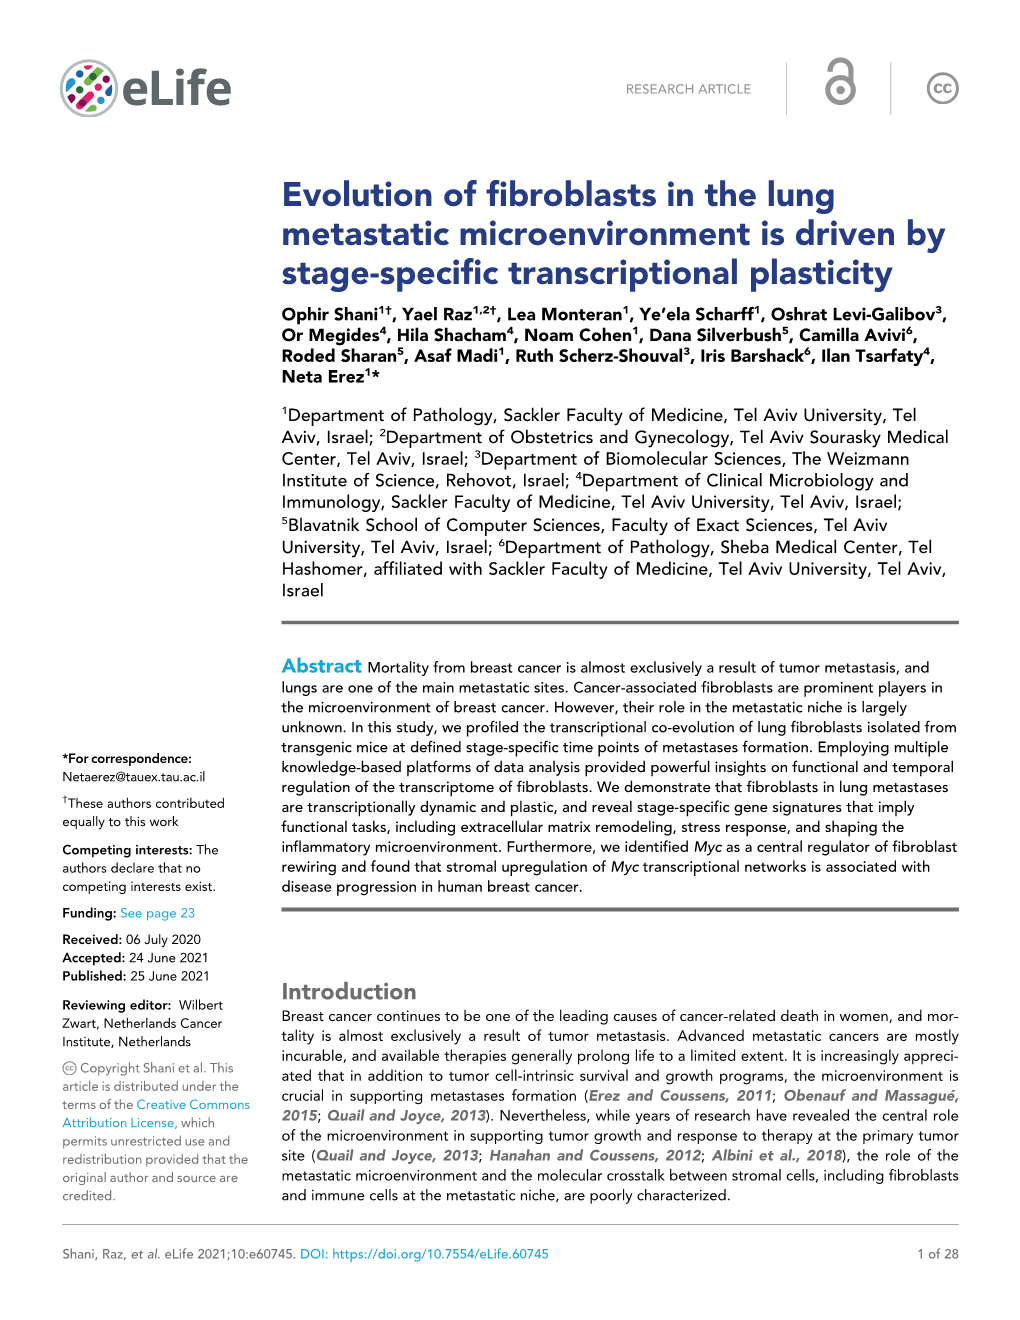 Evolution of Fibroblasts in the Lung Metastatic Microenvironment